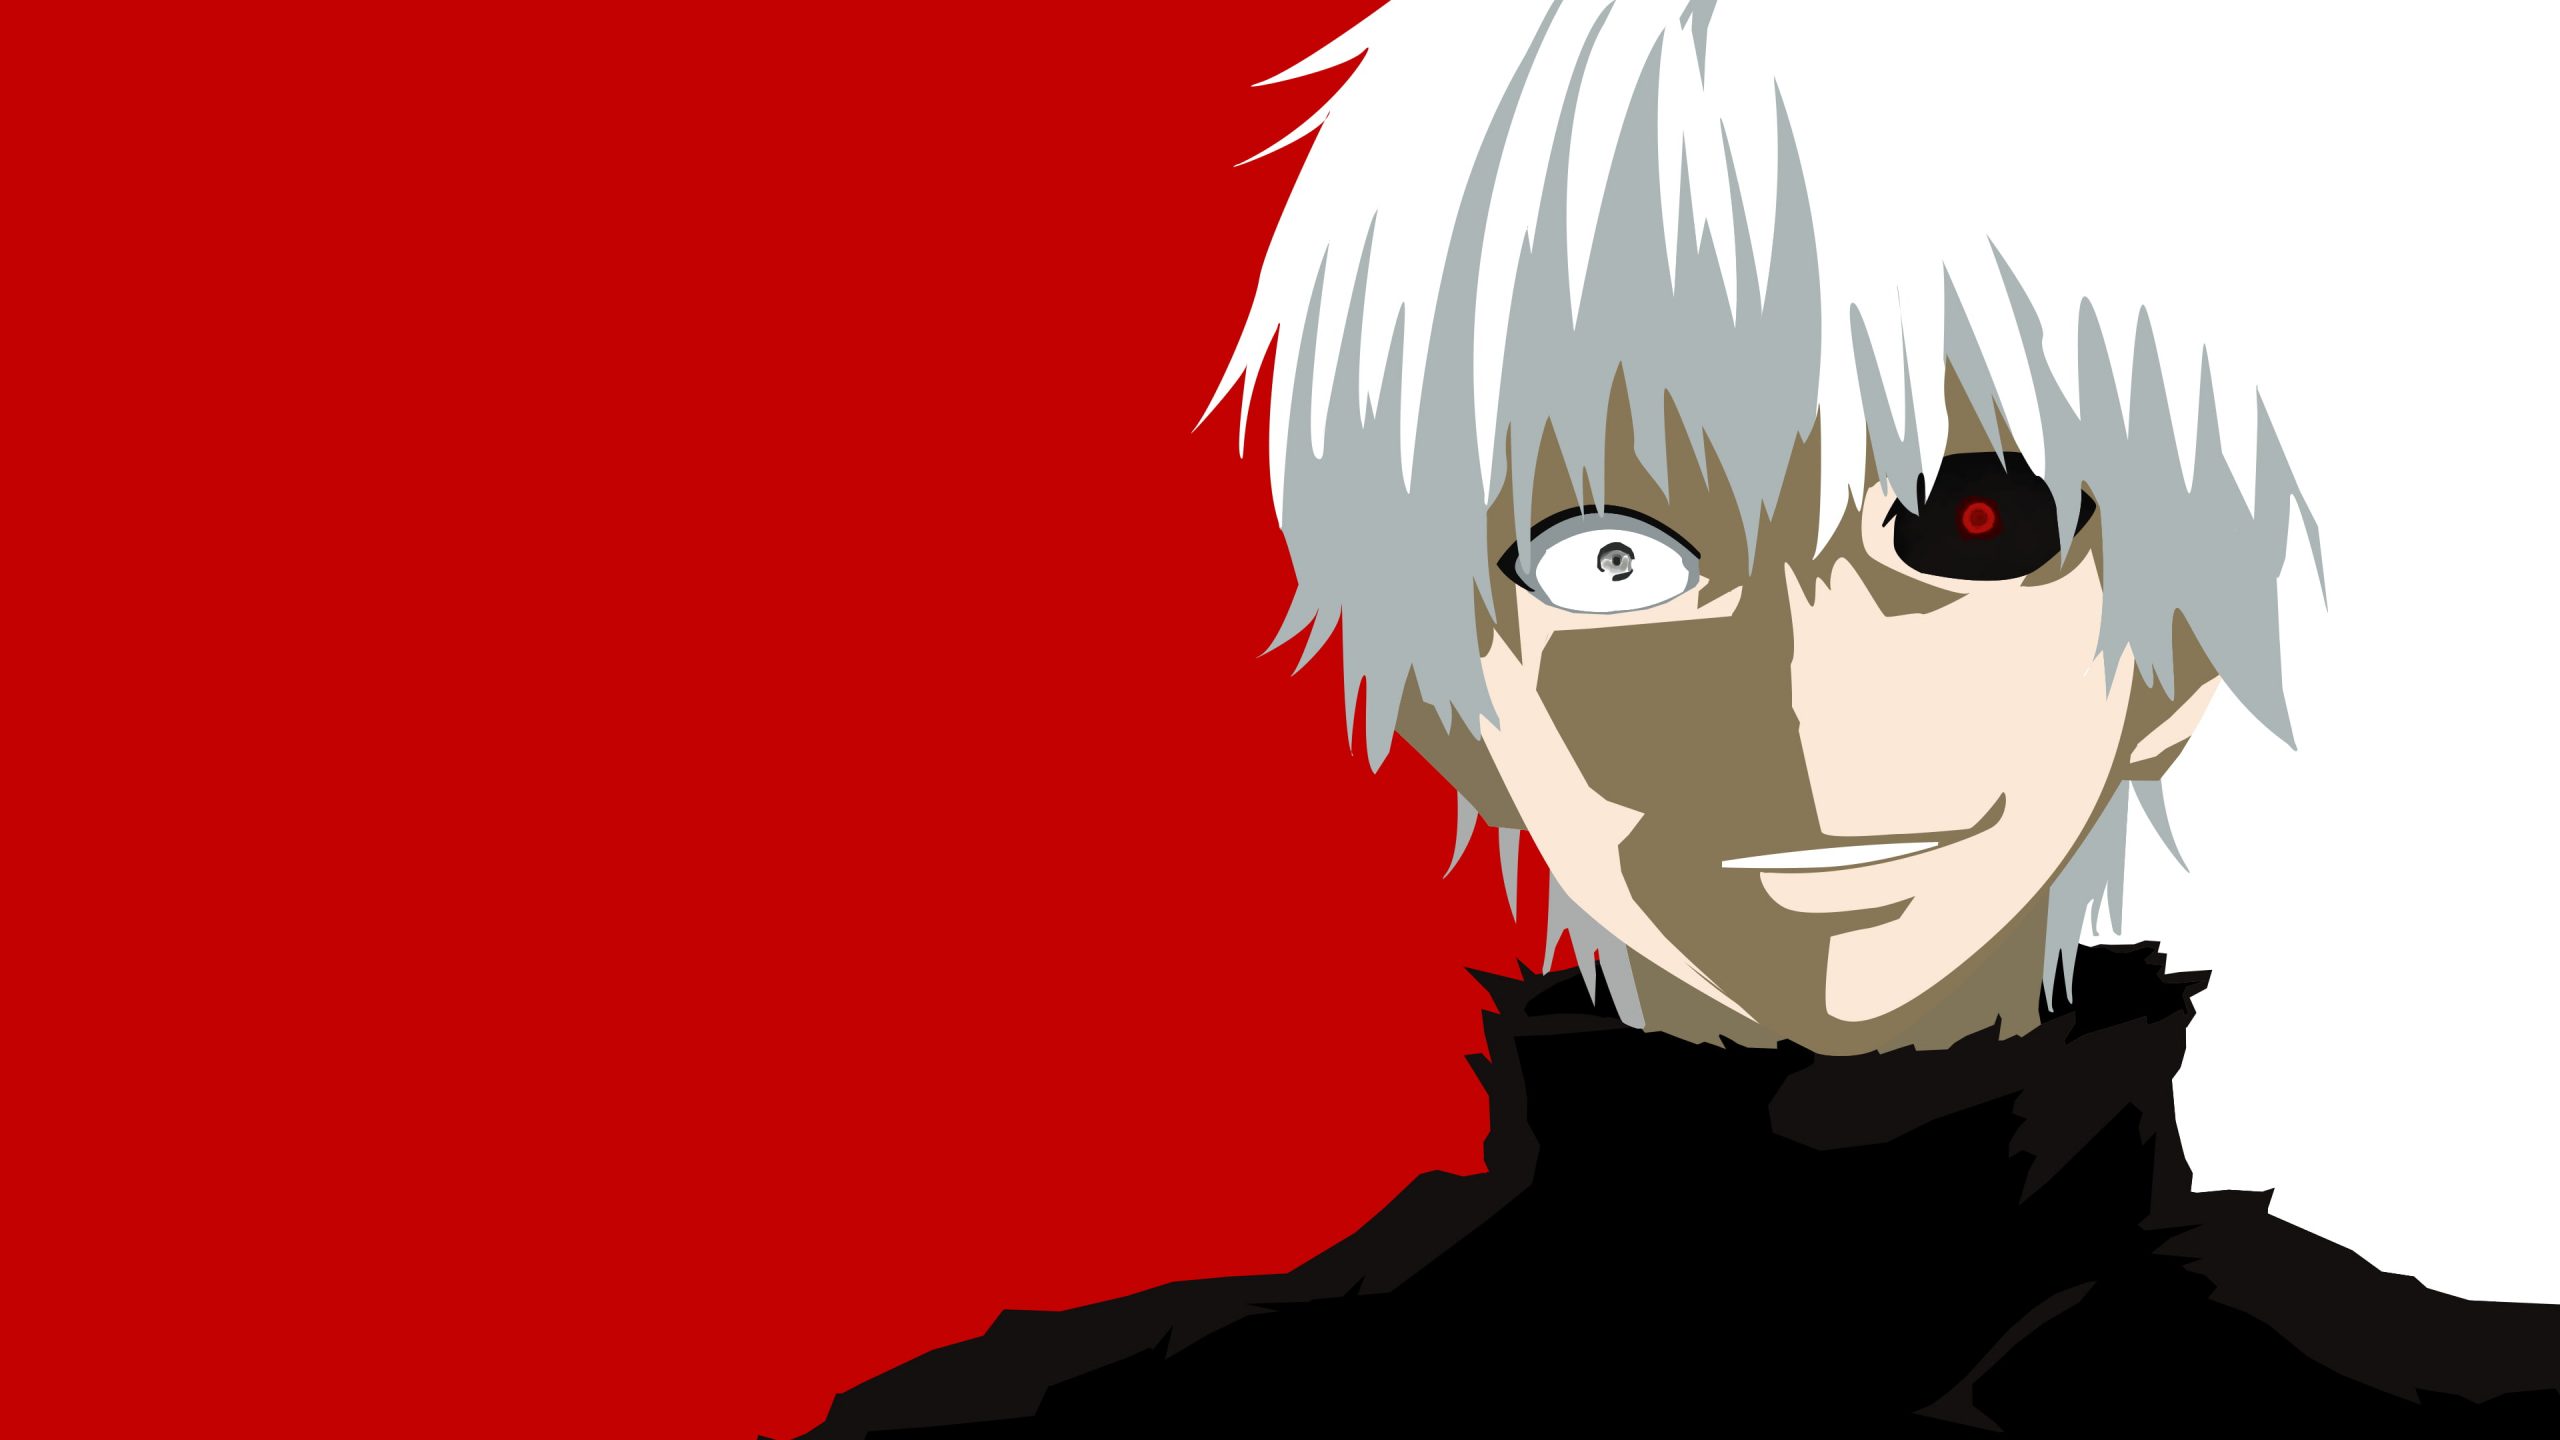 Share 86+ about tokyo ghoul wallpaper super hot .vn